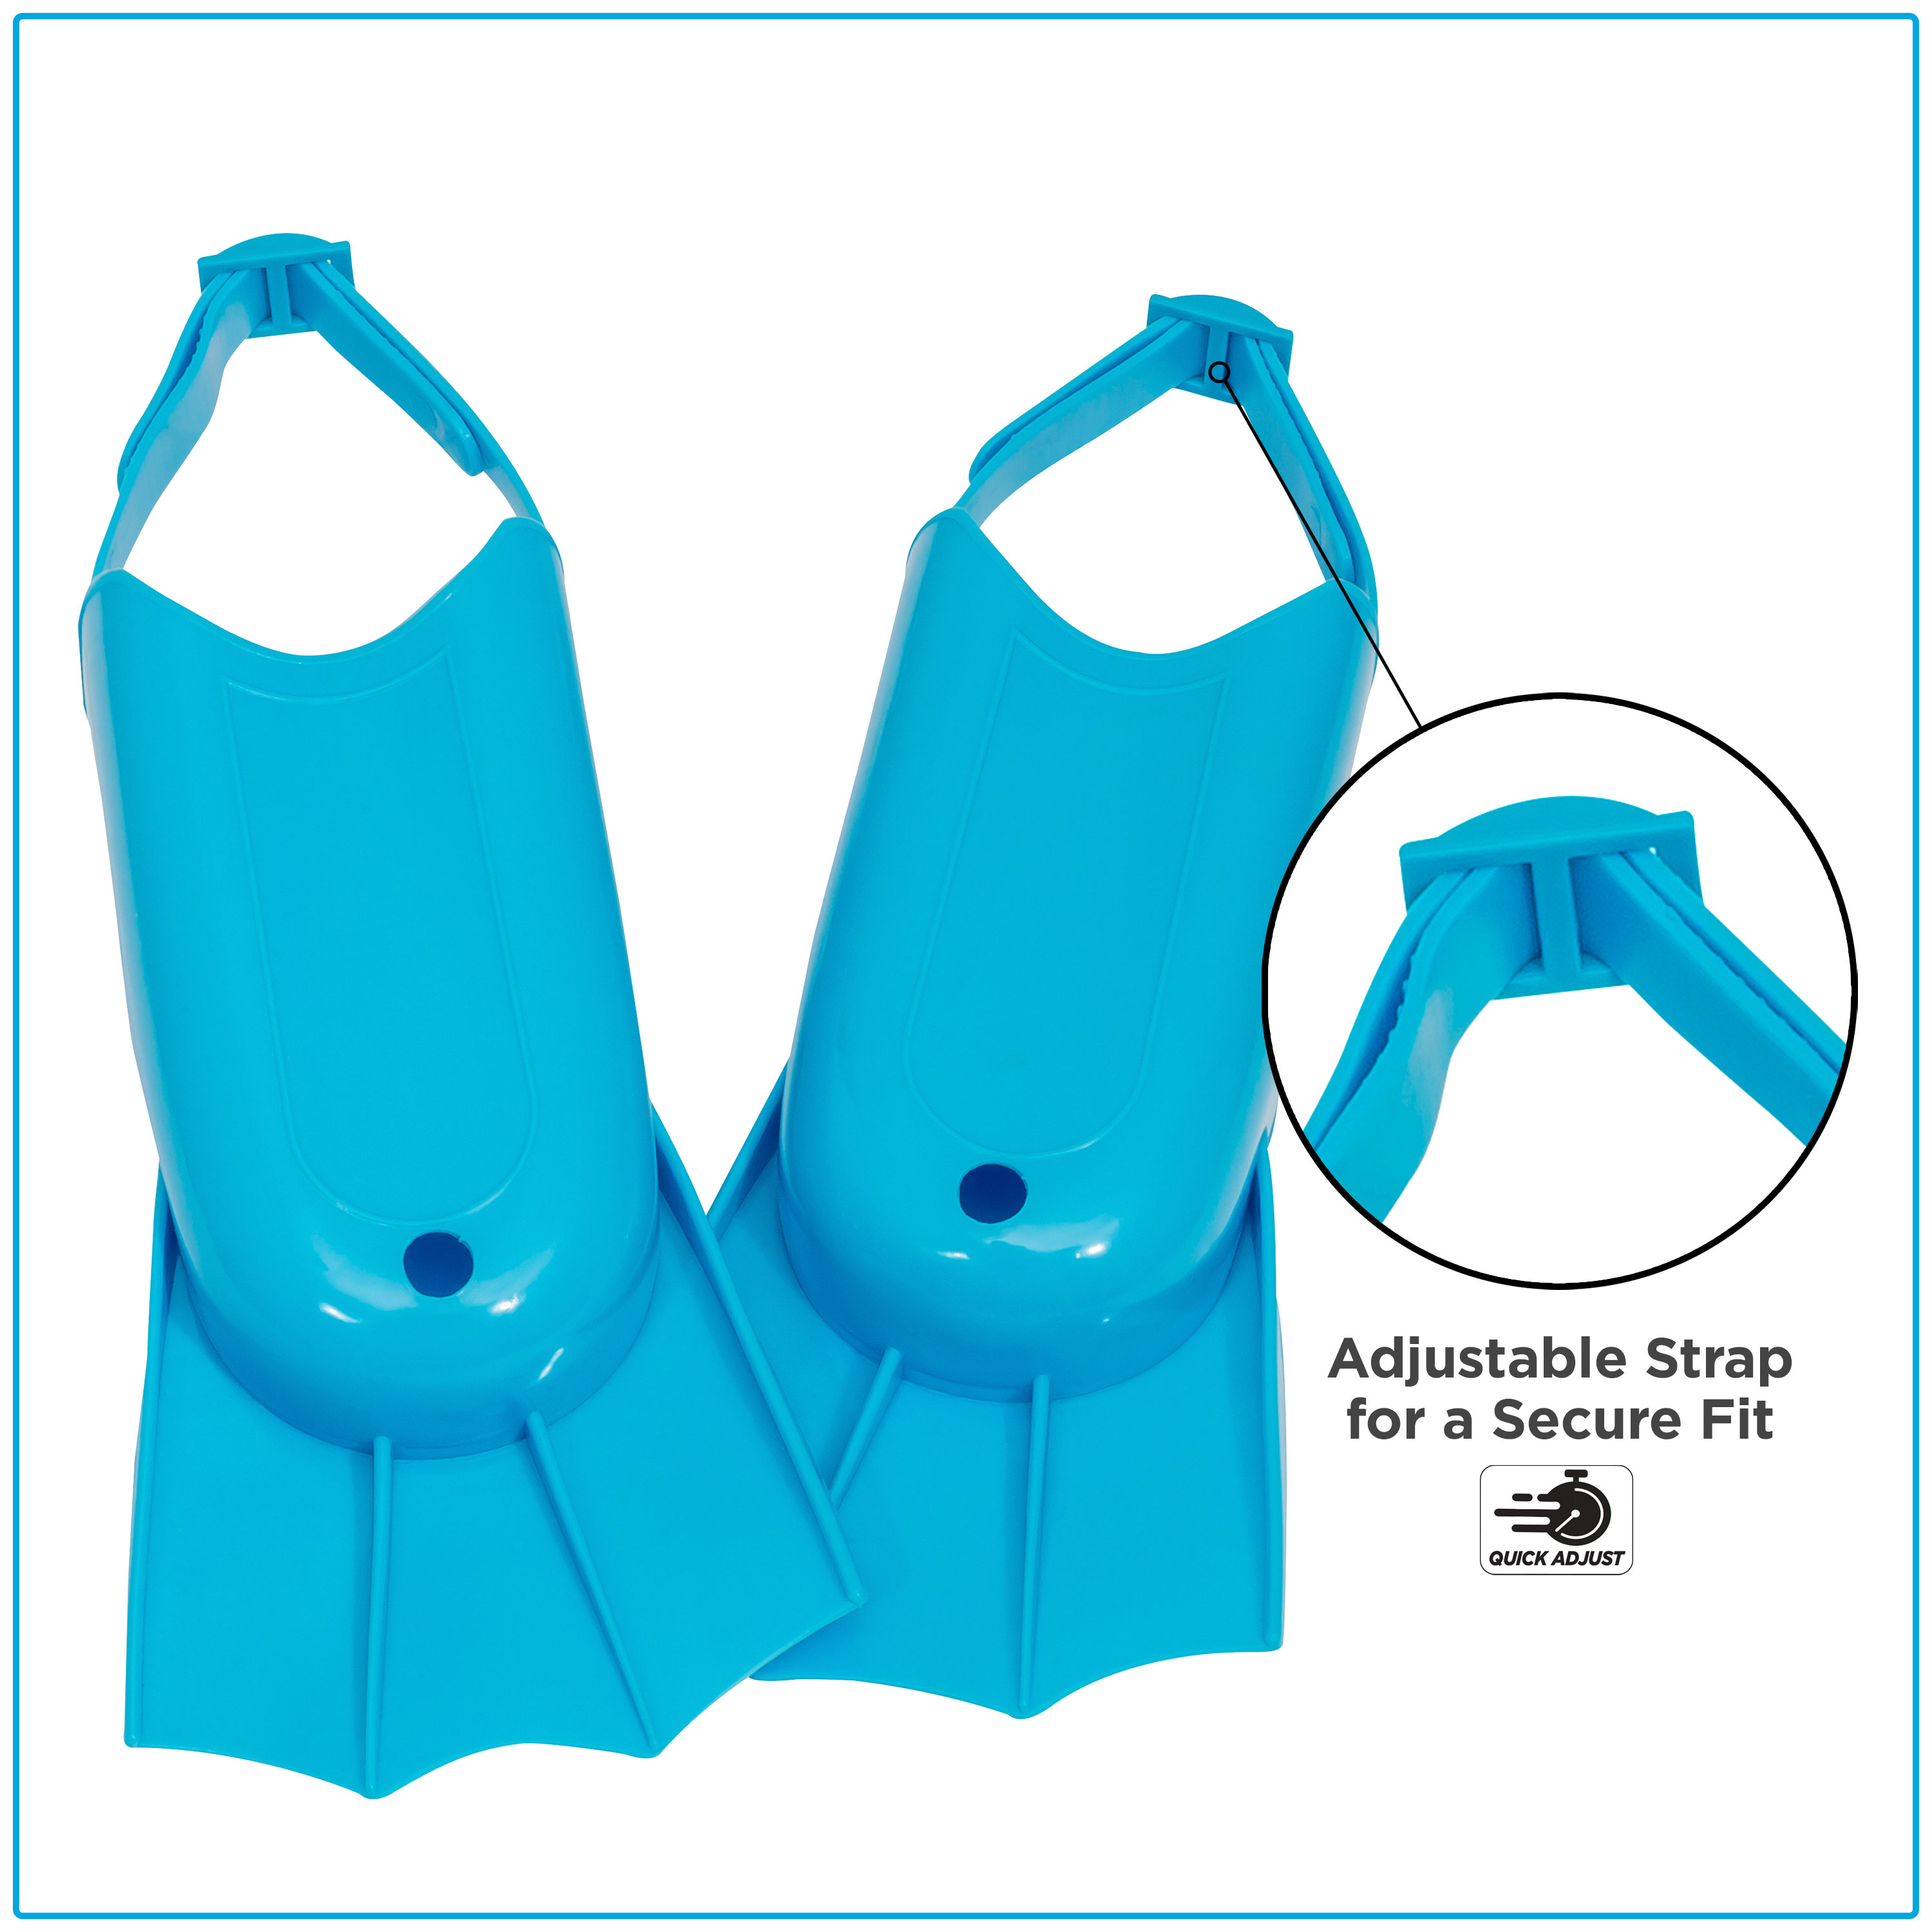 Dolfino Octopus Blue Unisex Dive Set for Children, Includes 5 Pieces, Hypoallergenic and Latex-Free - image 4 of 8